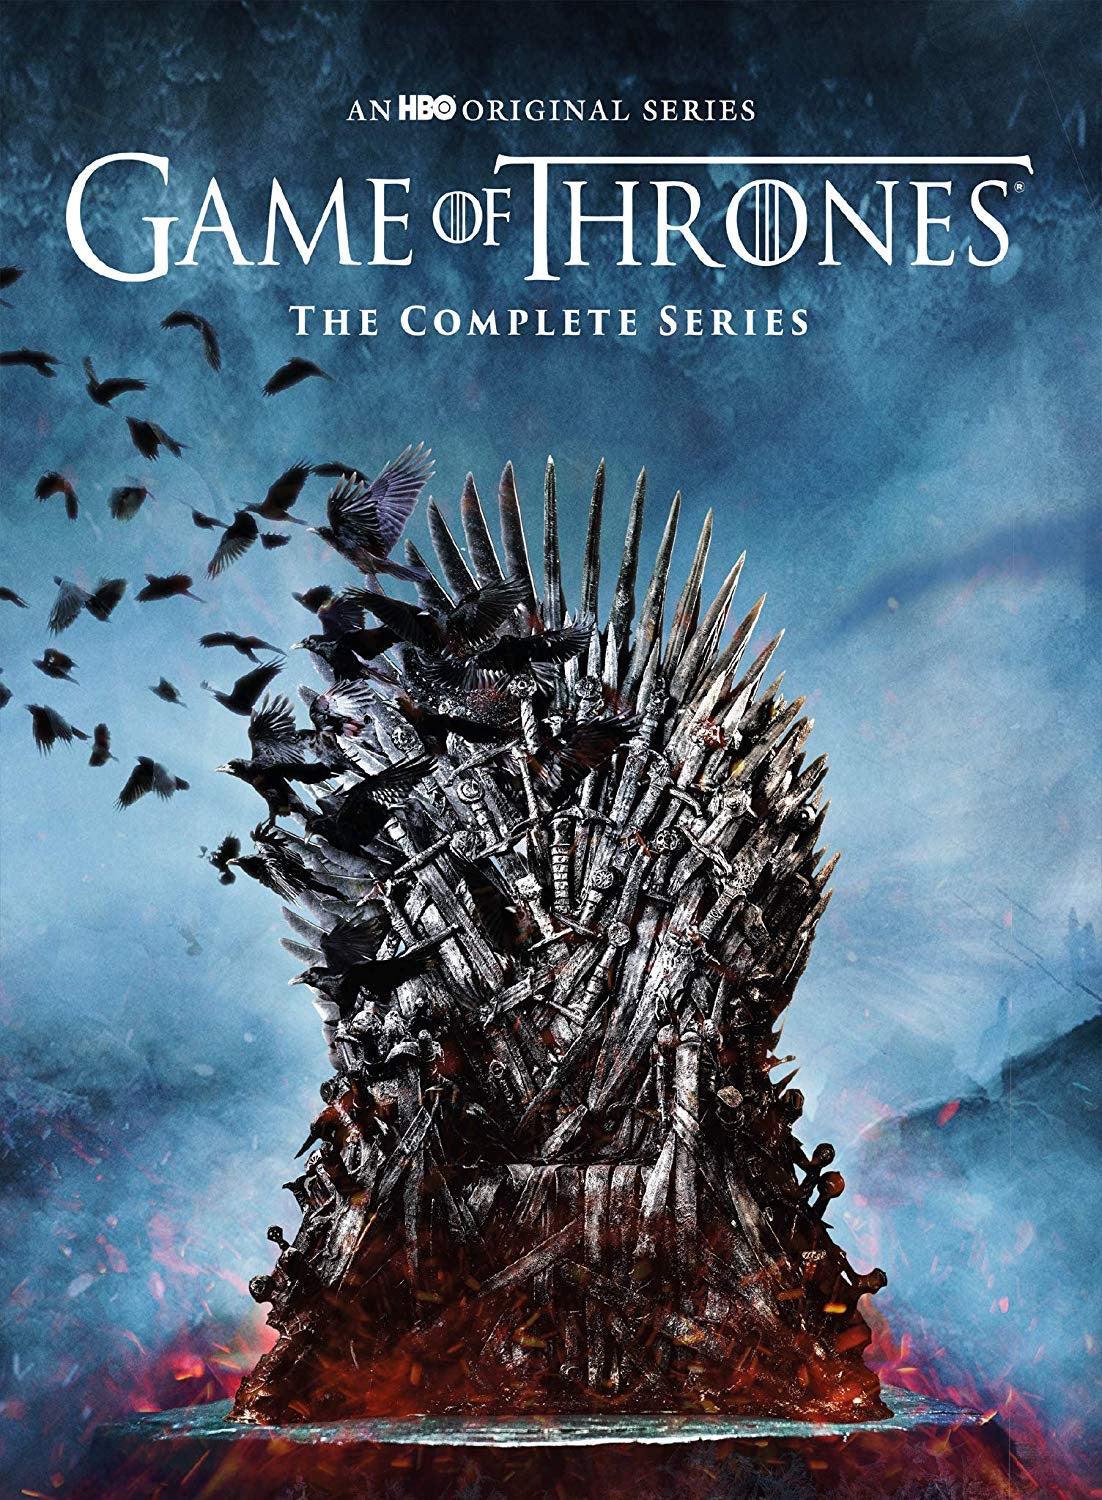 HBO's Game of Thrones: The Complete Series (2011-2019) iTunes HD redemption only